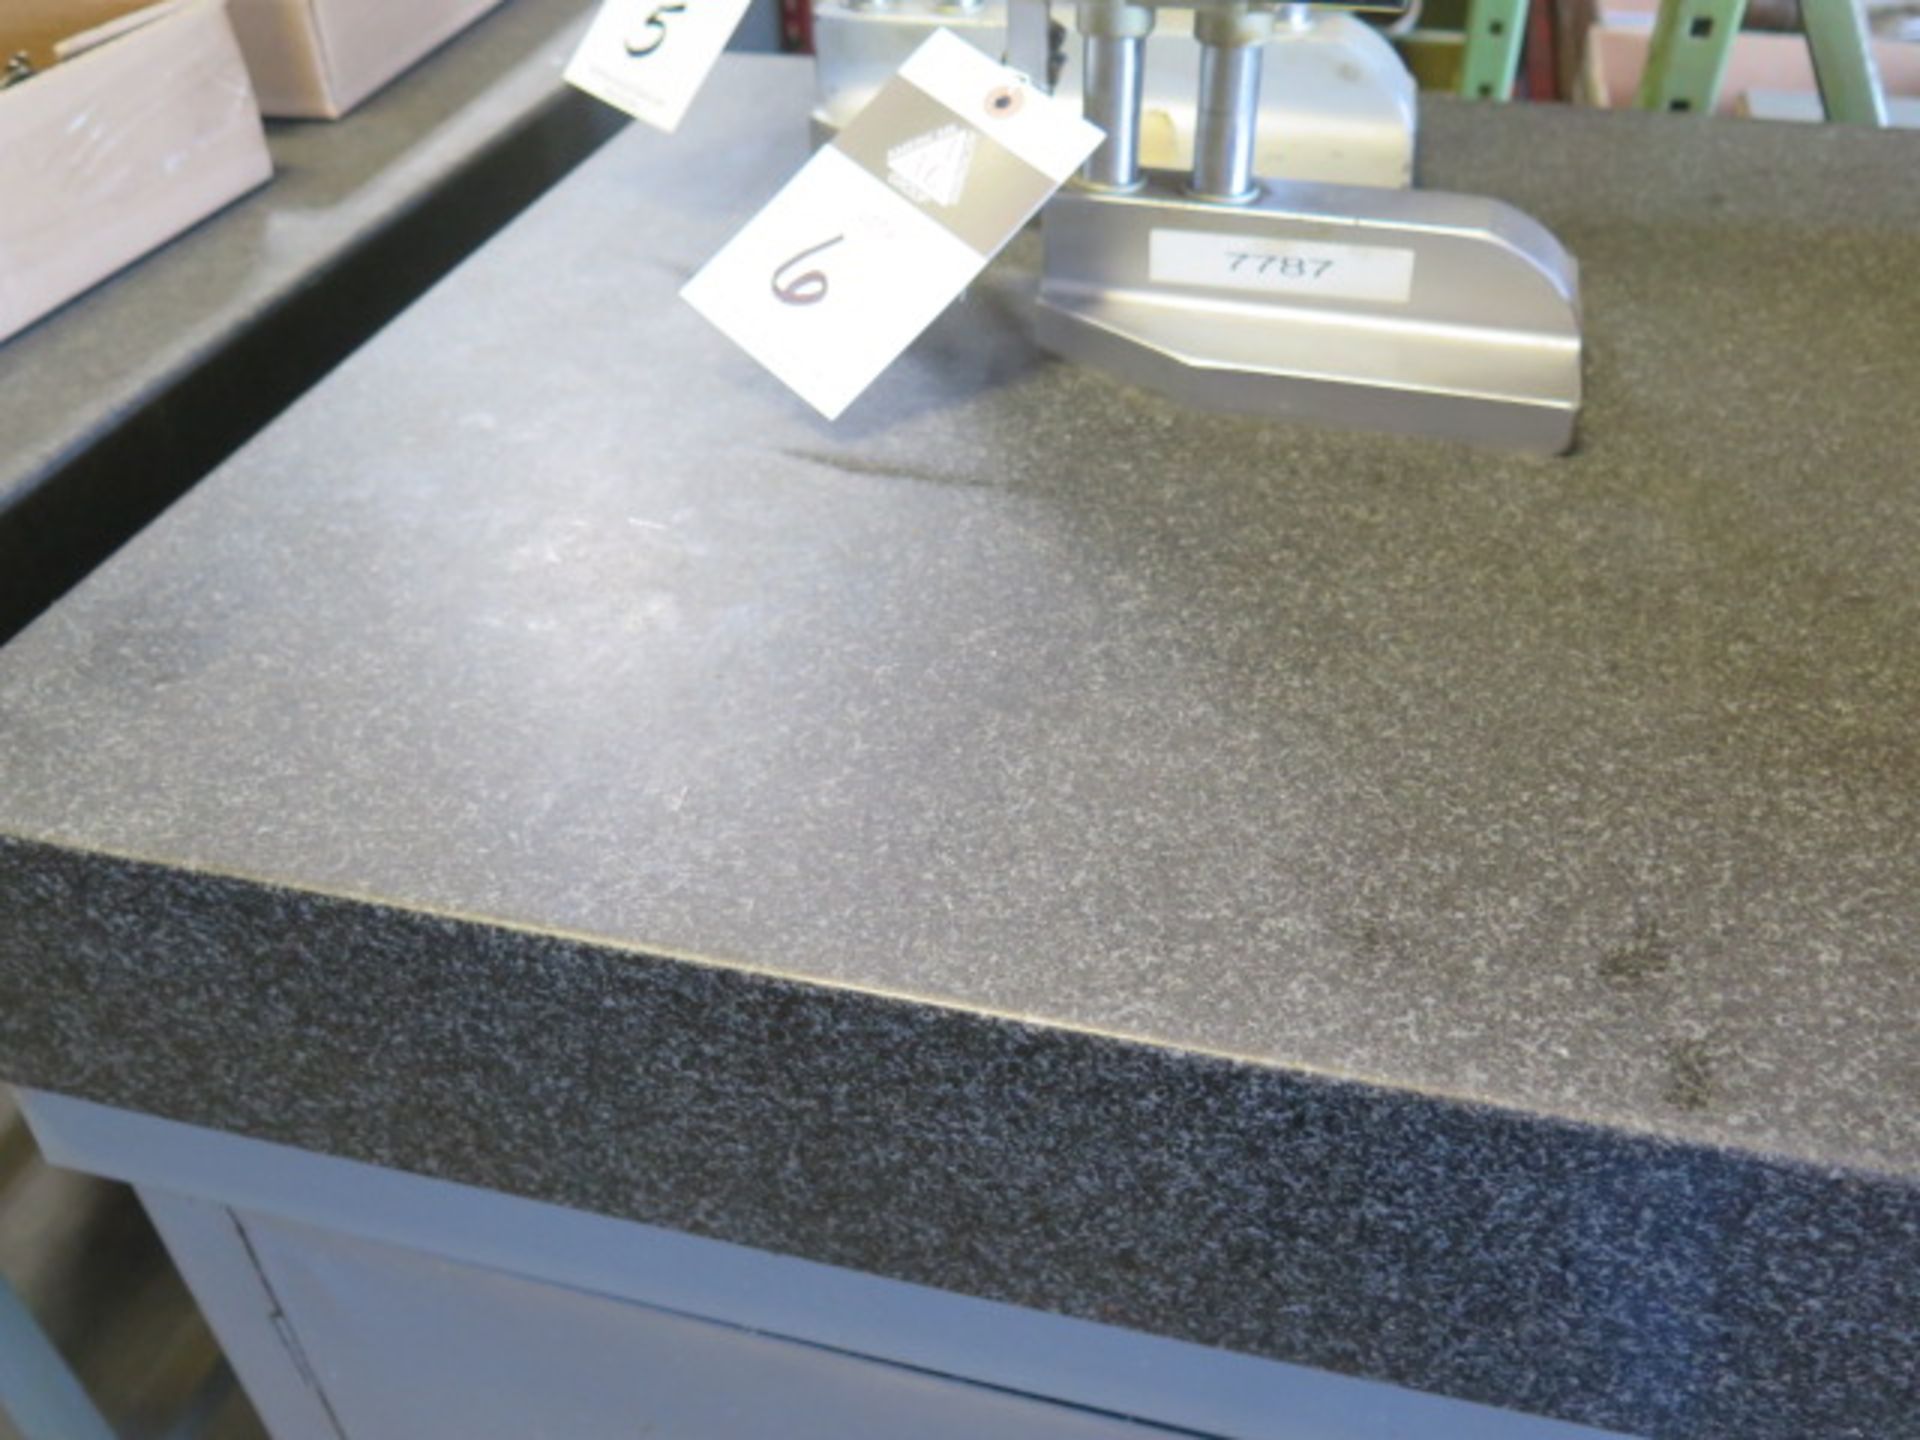 24” x 36” x 4” Granite Surface Plate w/ Cabinet Base (SOLD AS-IS – NO WARRANTY) - Image 2 of 2